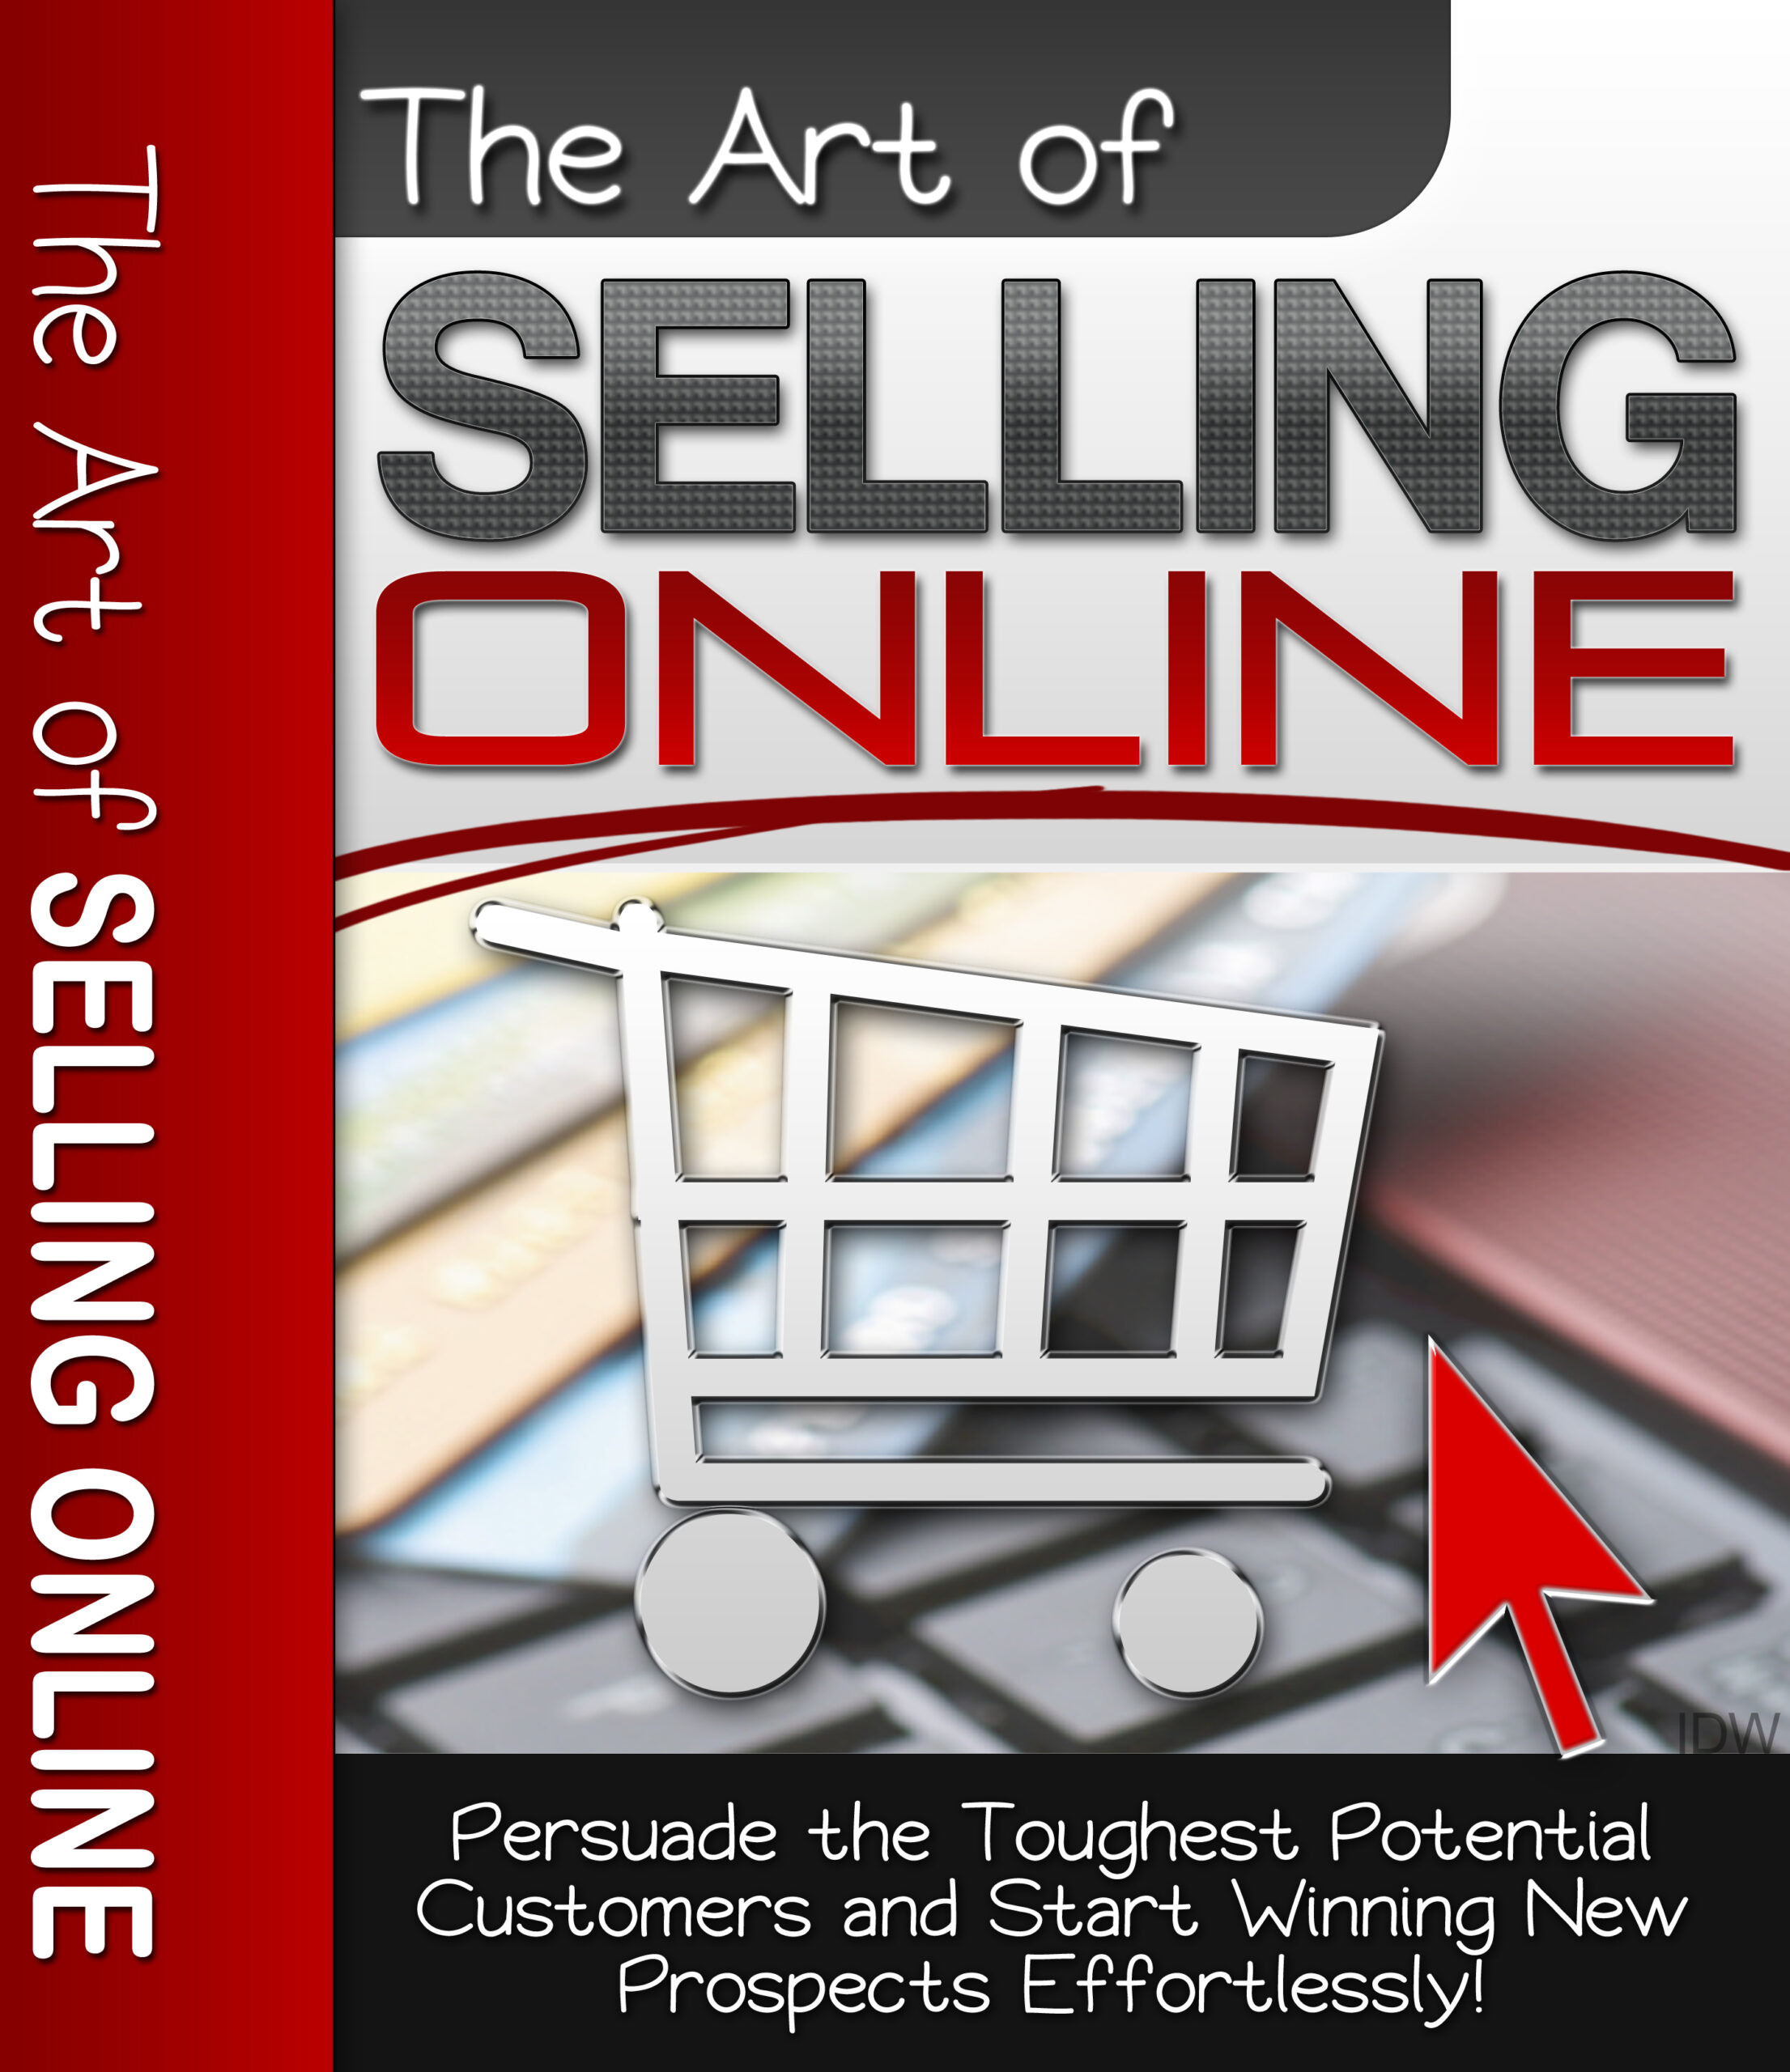 FREE: The Art Of Selling Online by Alfred Trust